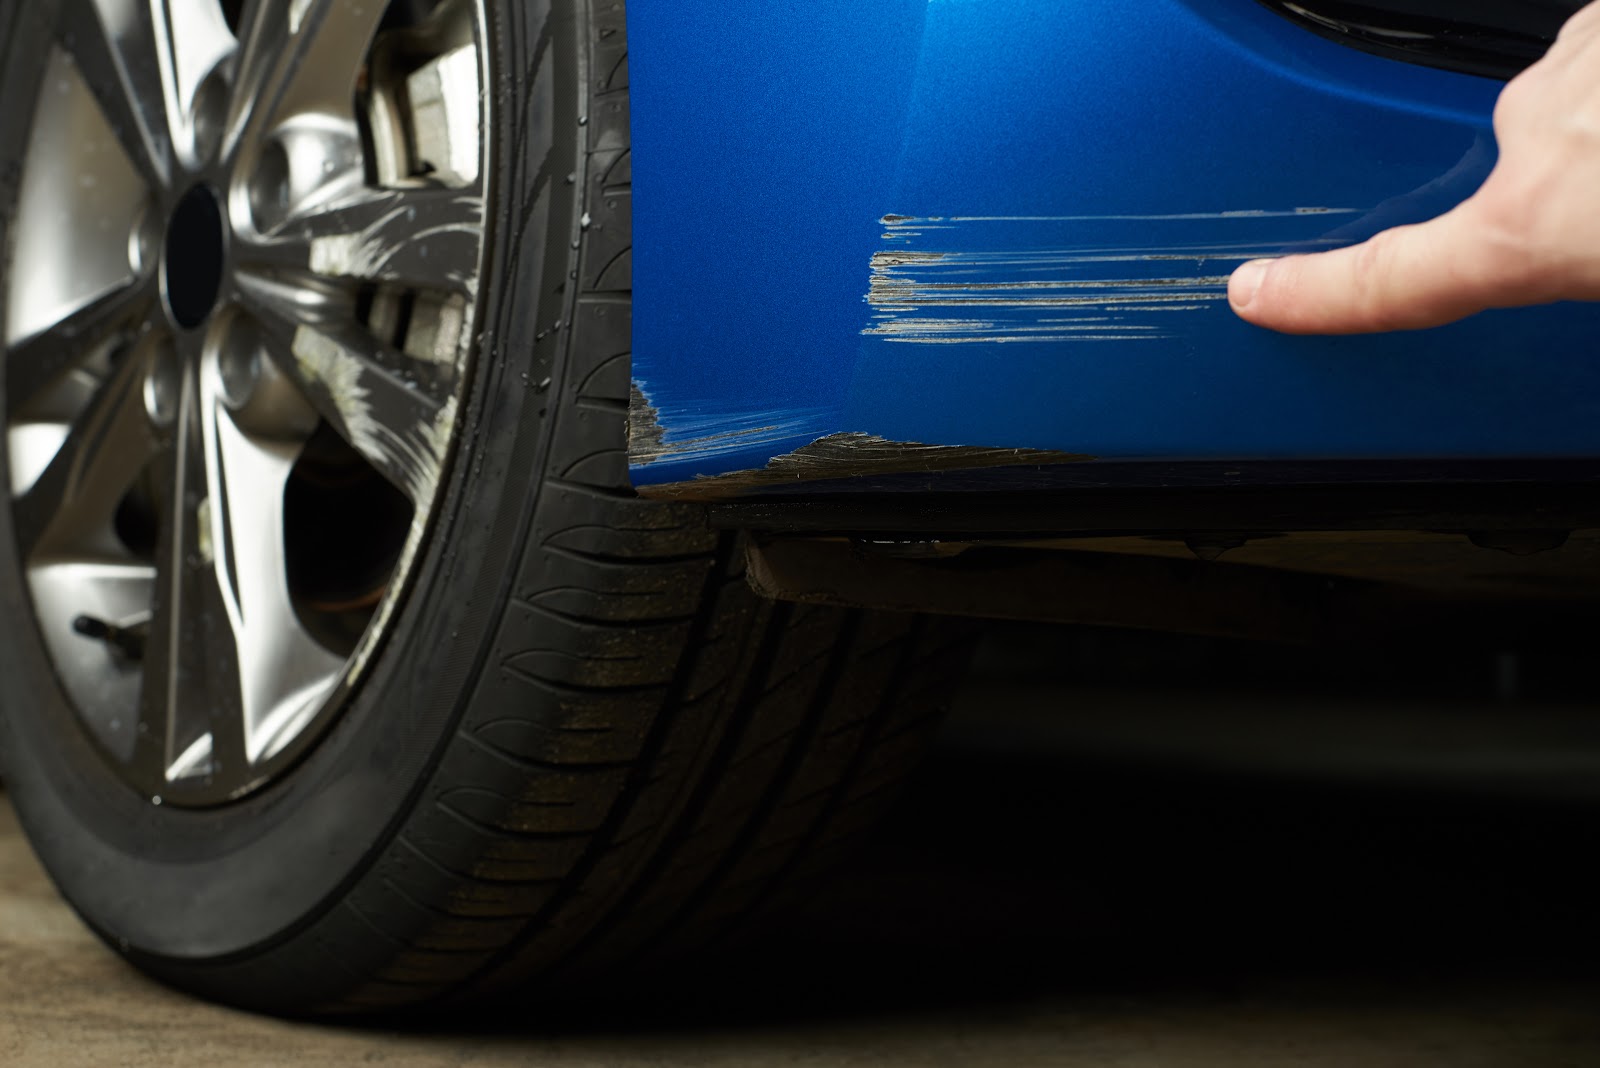 how to fix scratches on car, car maintenance tips, types of car scratches : how to fix scratches on car?